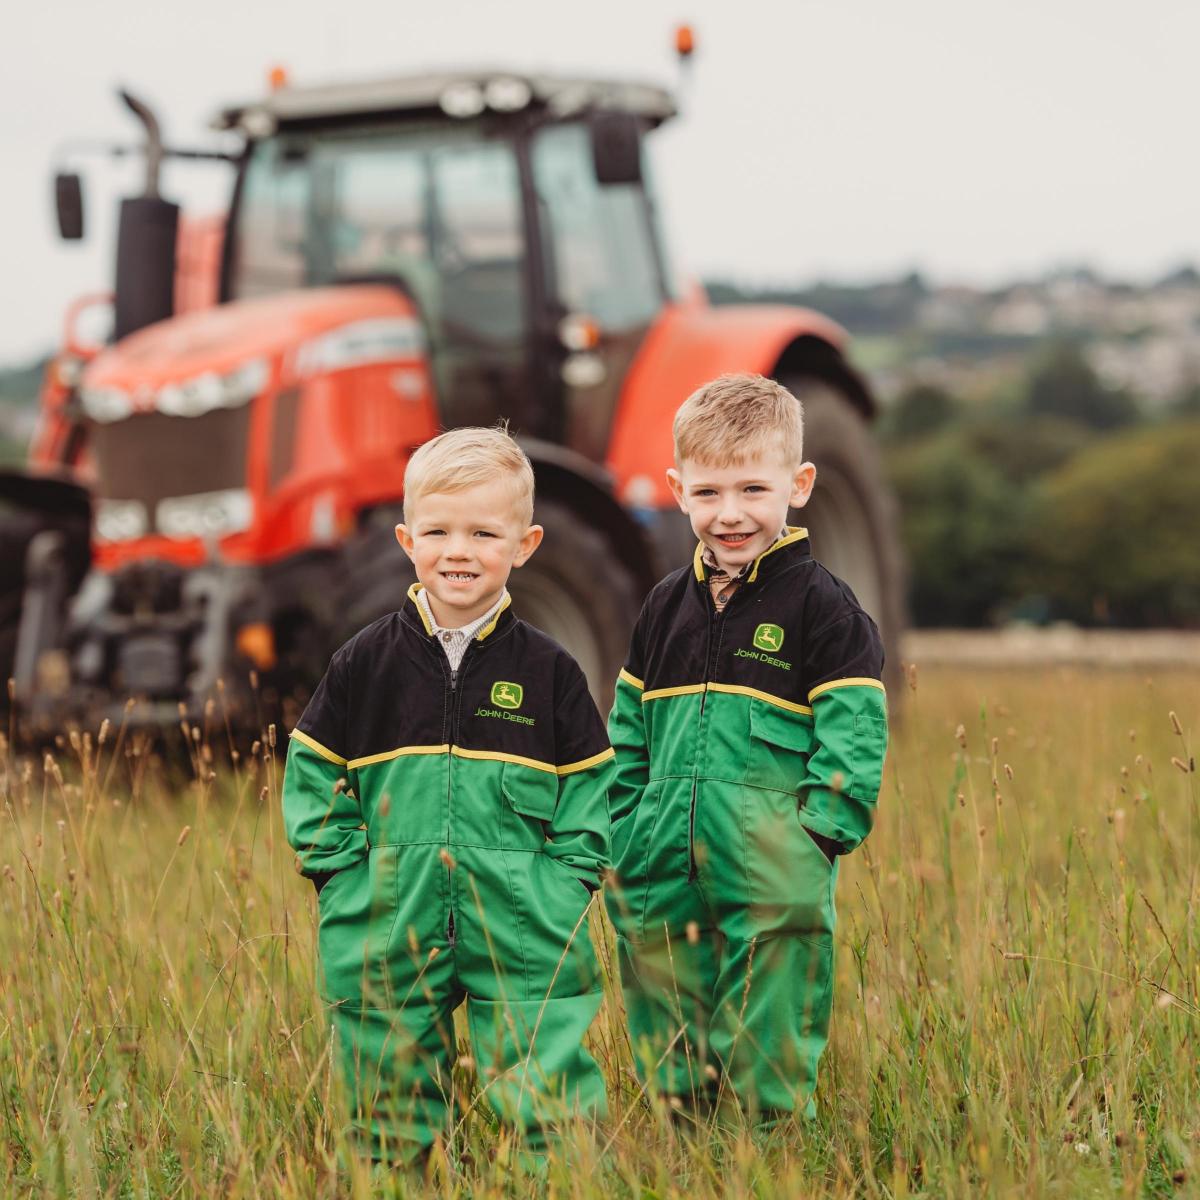 Kirsty Anderson - This is Mayson and Jensen two cousins obsessed with farming with their granda in strichen aberdeenshire.